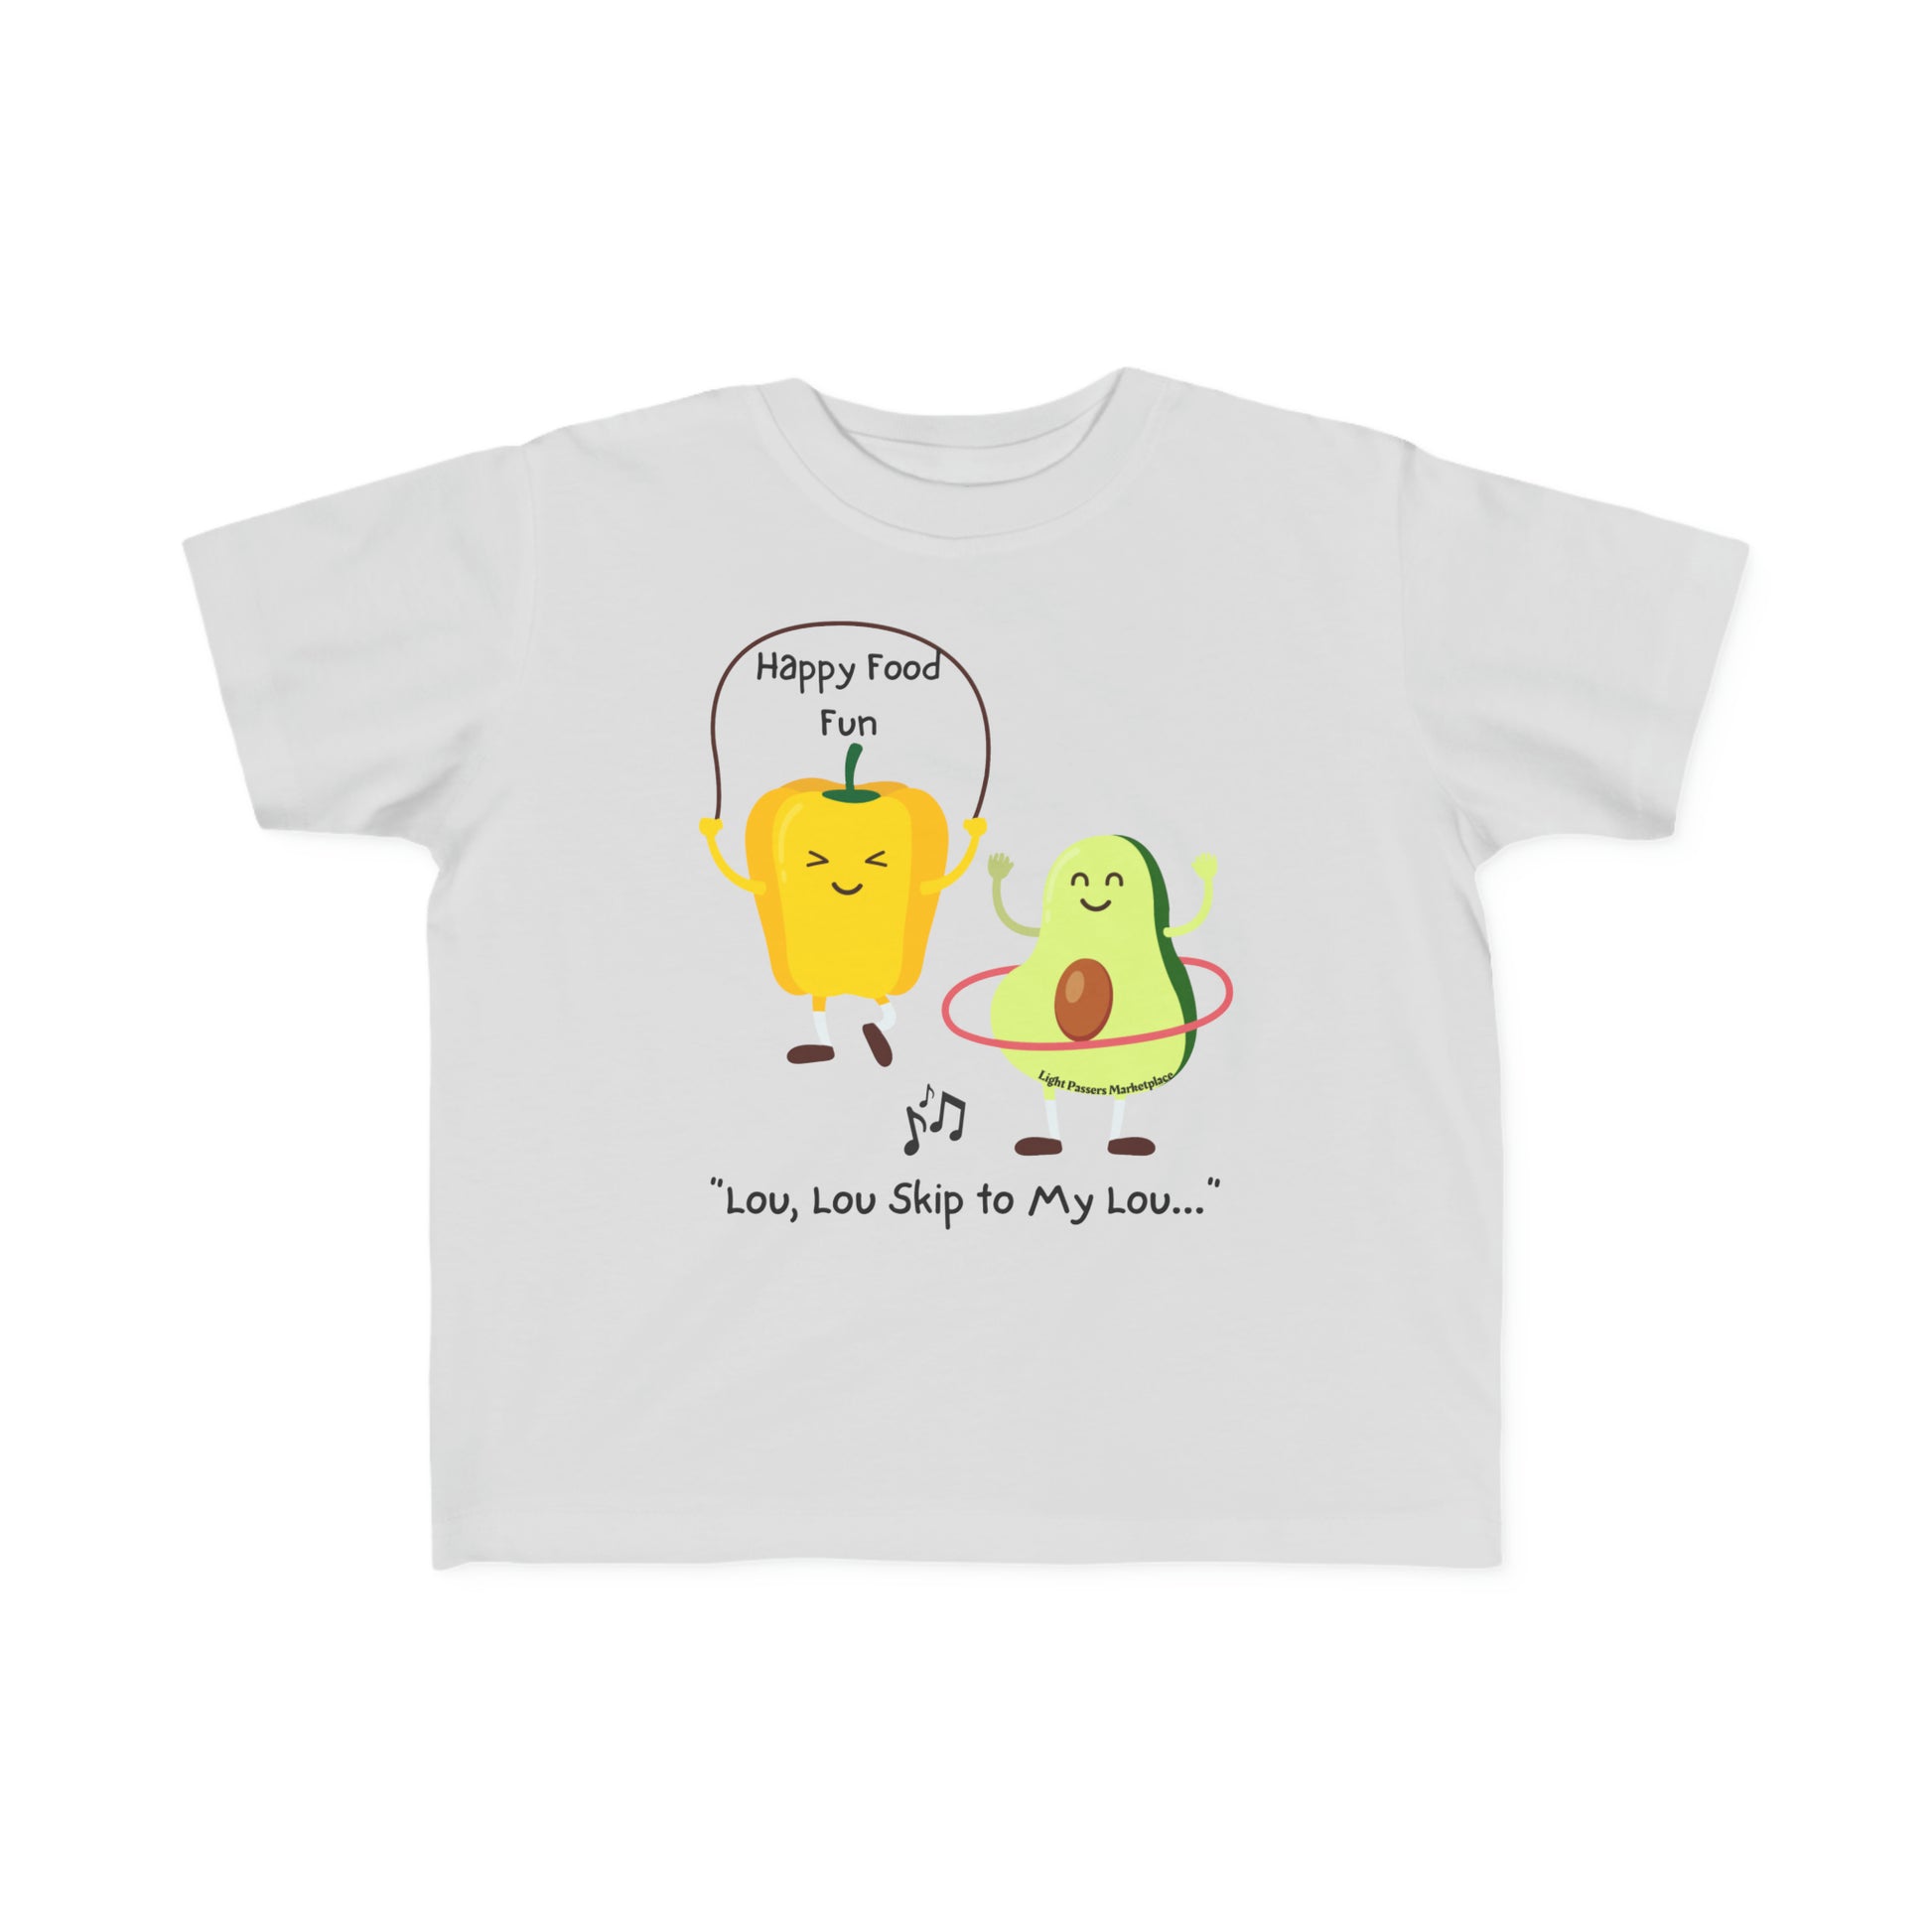 A white toddler t-shirt featuring cartoon food characters, made of soft 100% combed cotton. Durable print, tear-away label, and a classic fit for comfort.